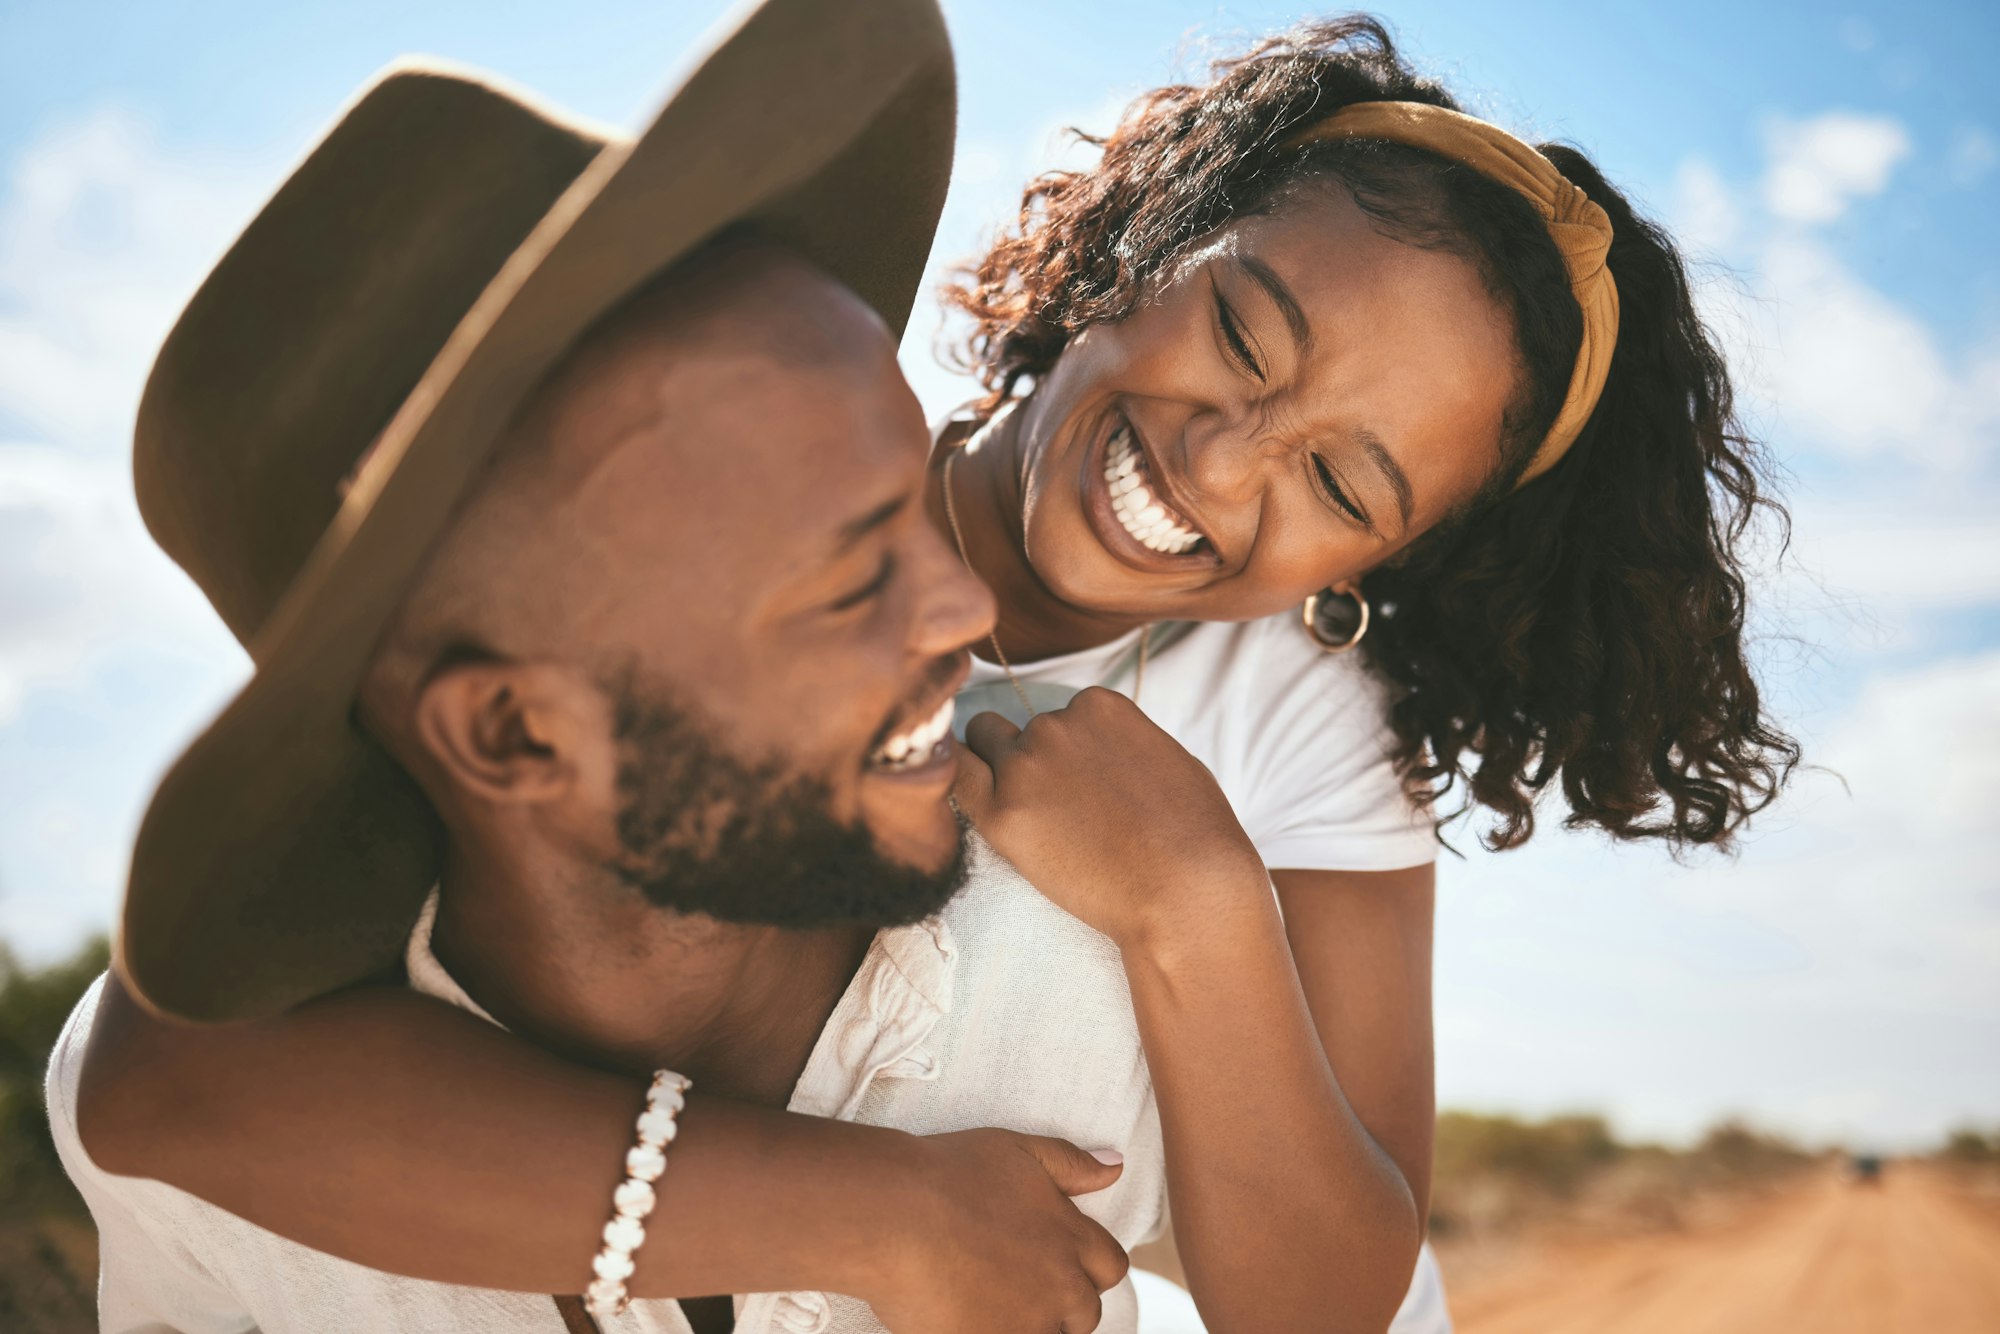 Happy, love and summer hug of a couple together with quality time in nature. Black people with happ